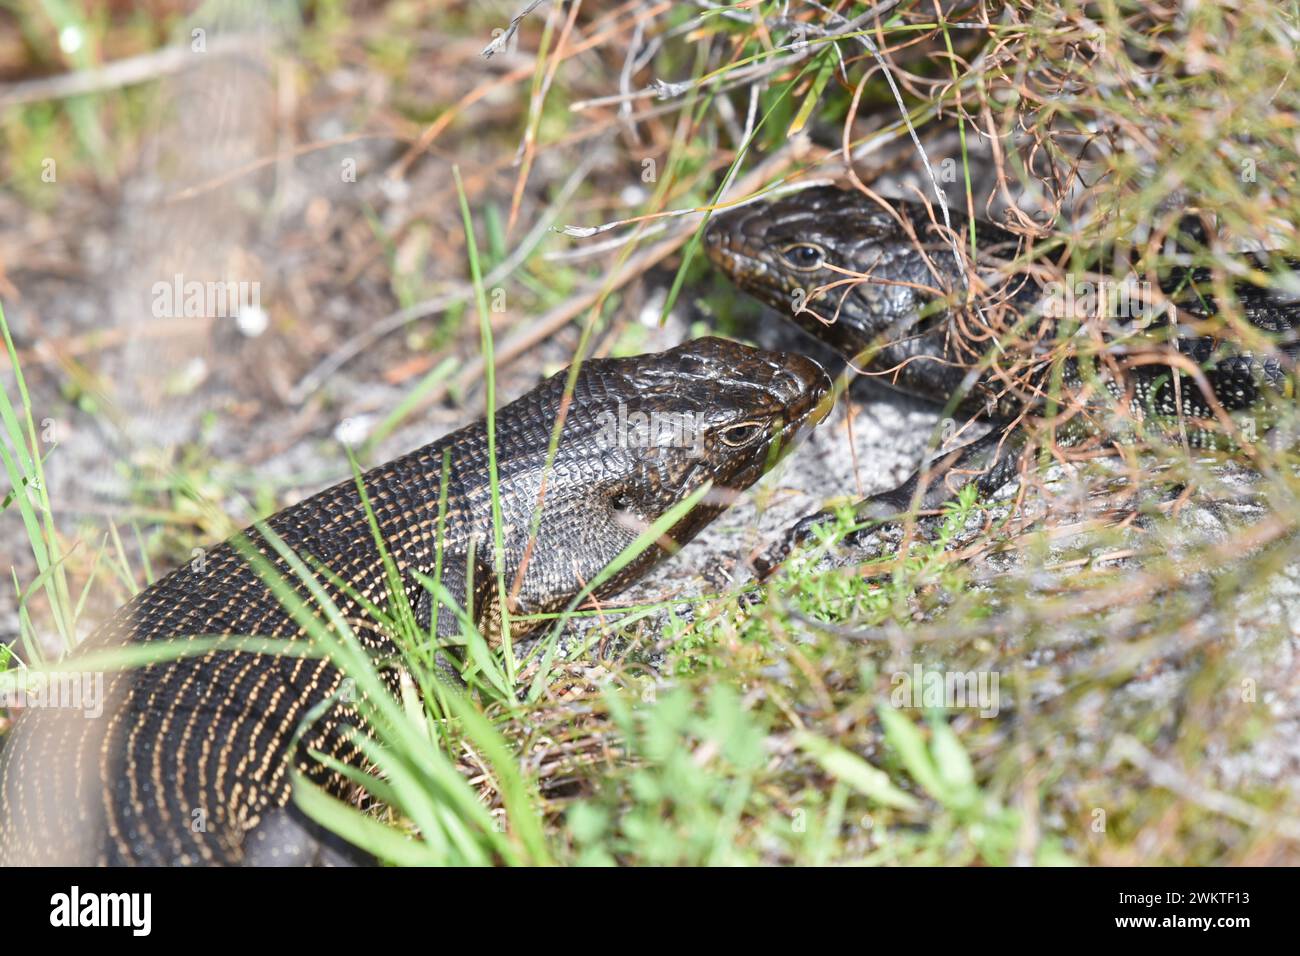 Close-up of King's skink (Egernia kingii), a lizard species which is endemic to Australia Stock Photo